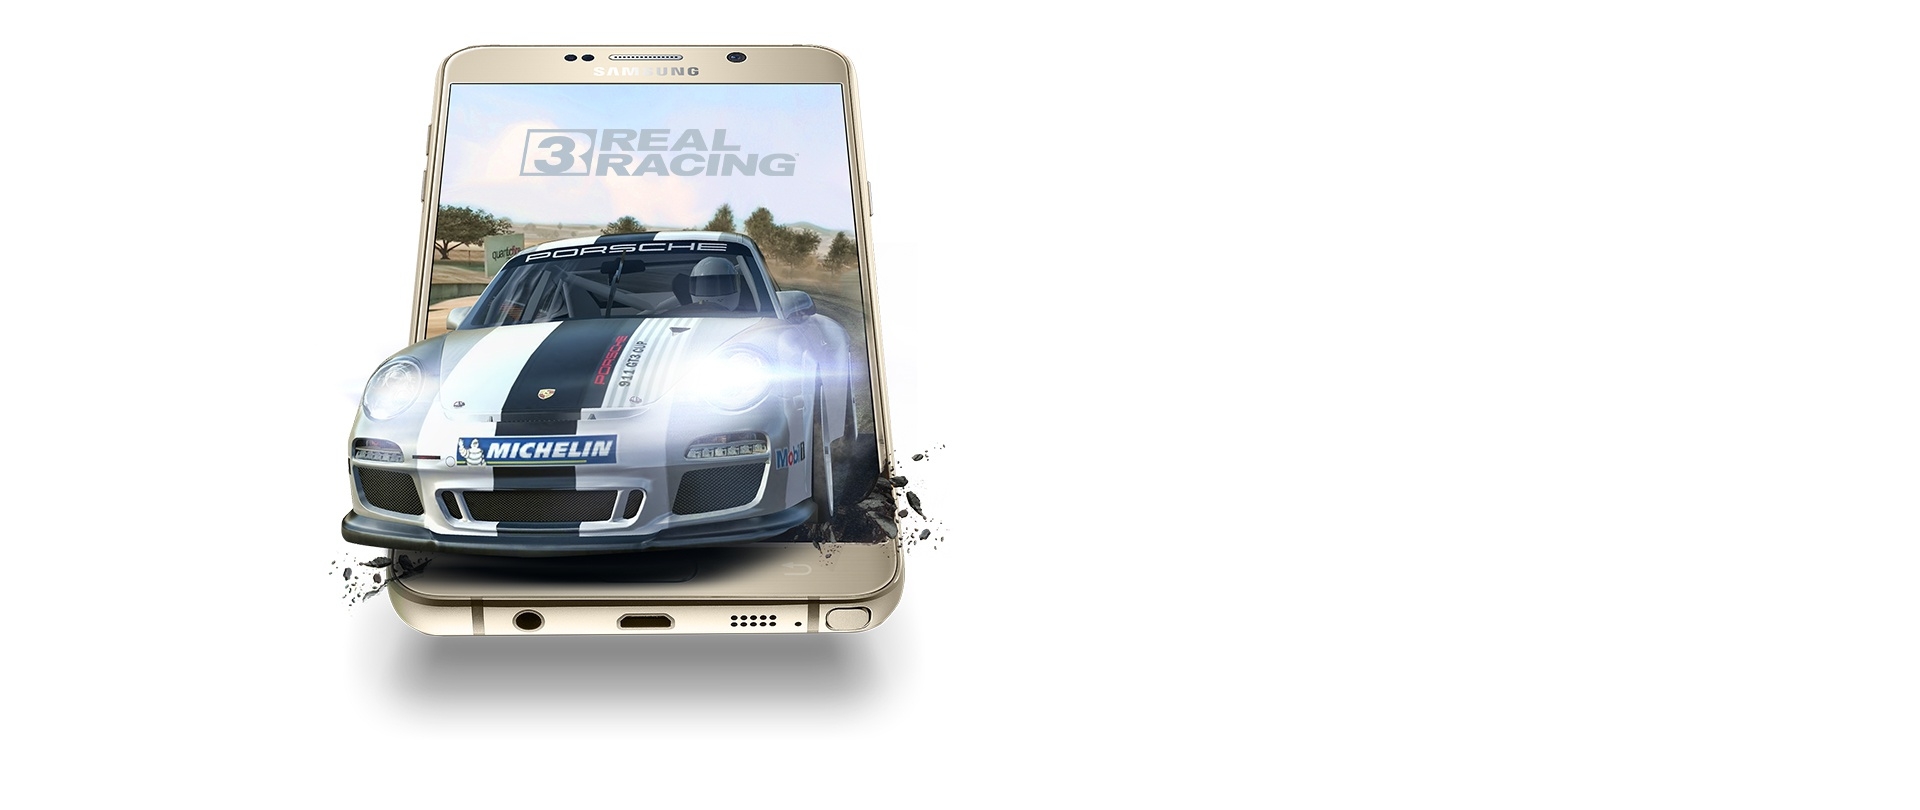 Real Racing game screen shot on gold platinum Galaxy Note5 screen